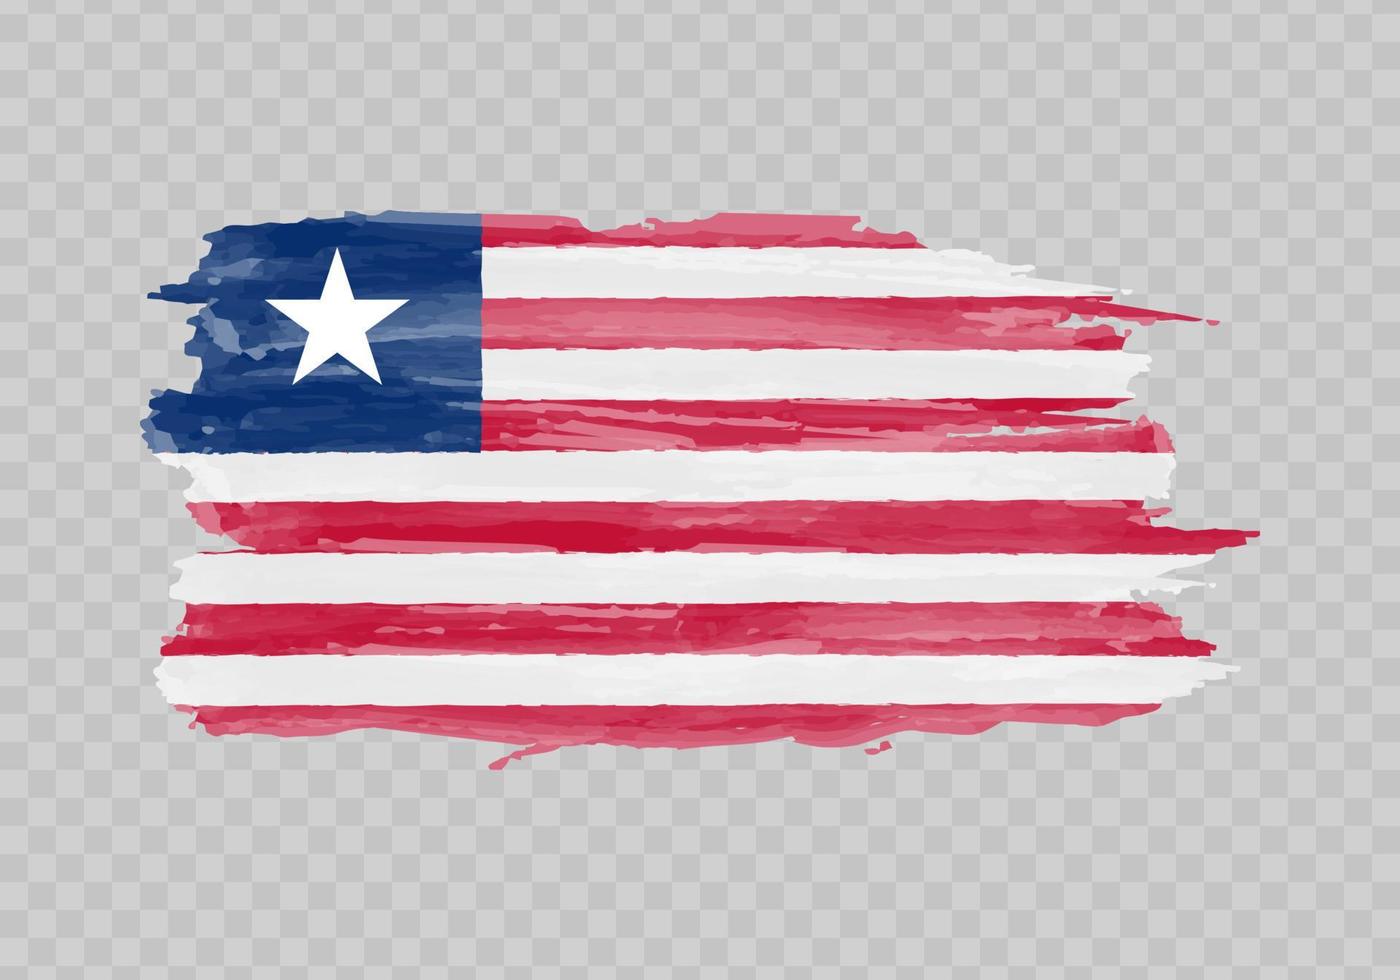 Watercolor painting flag of Liberia vector